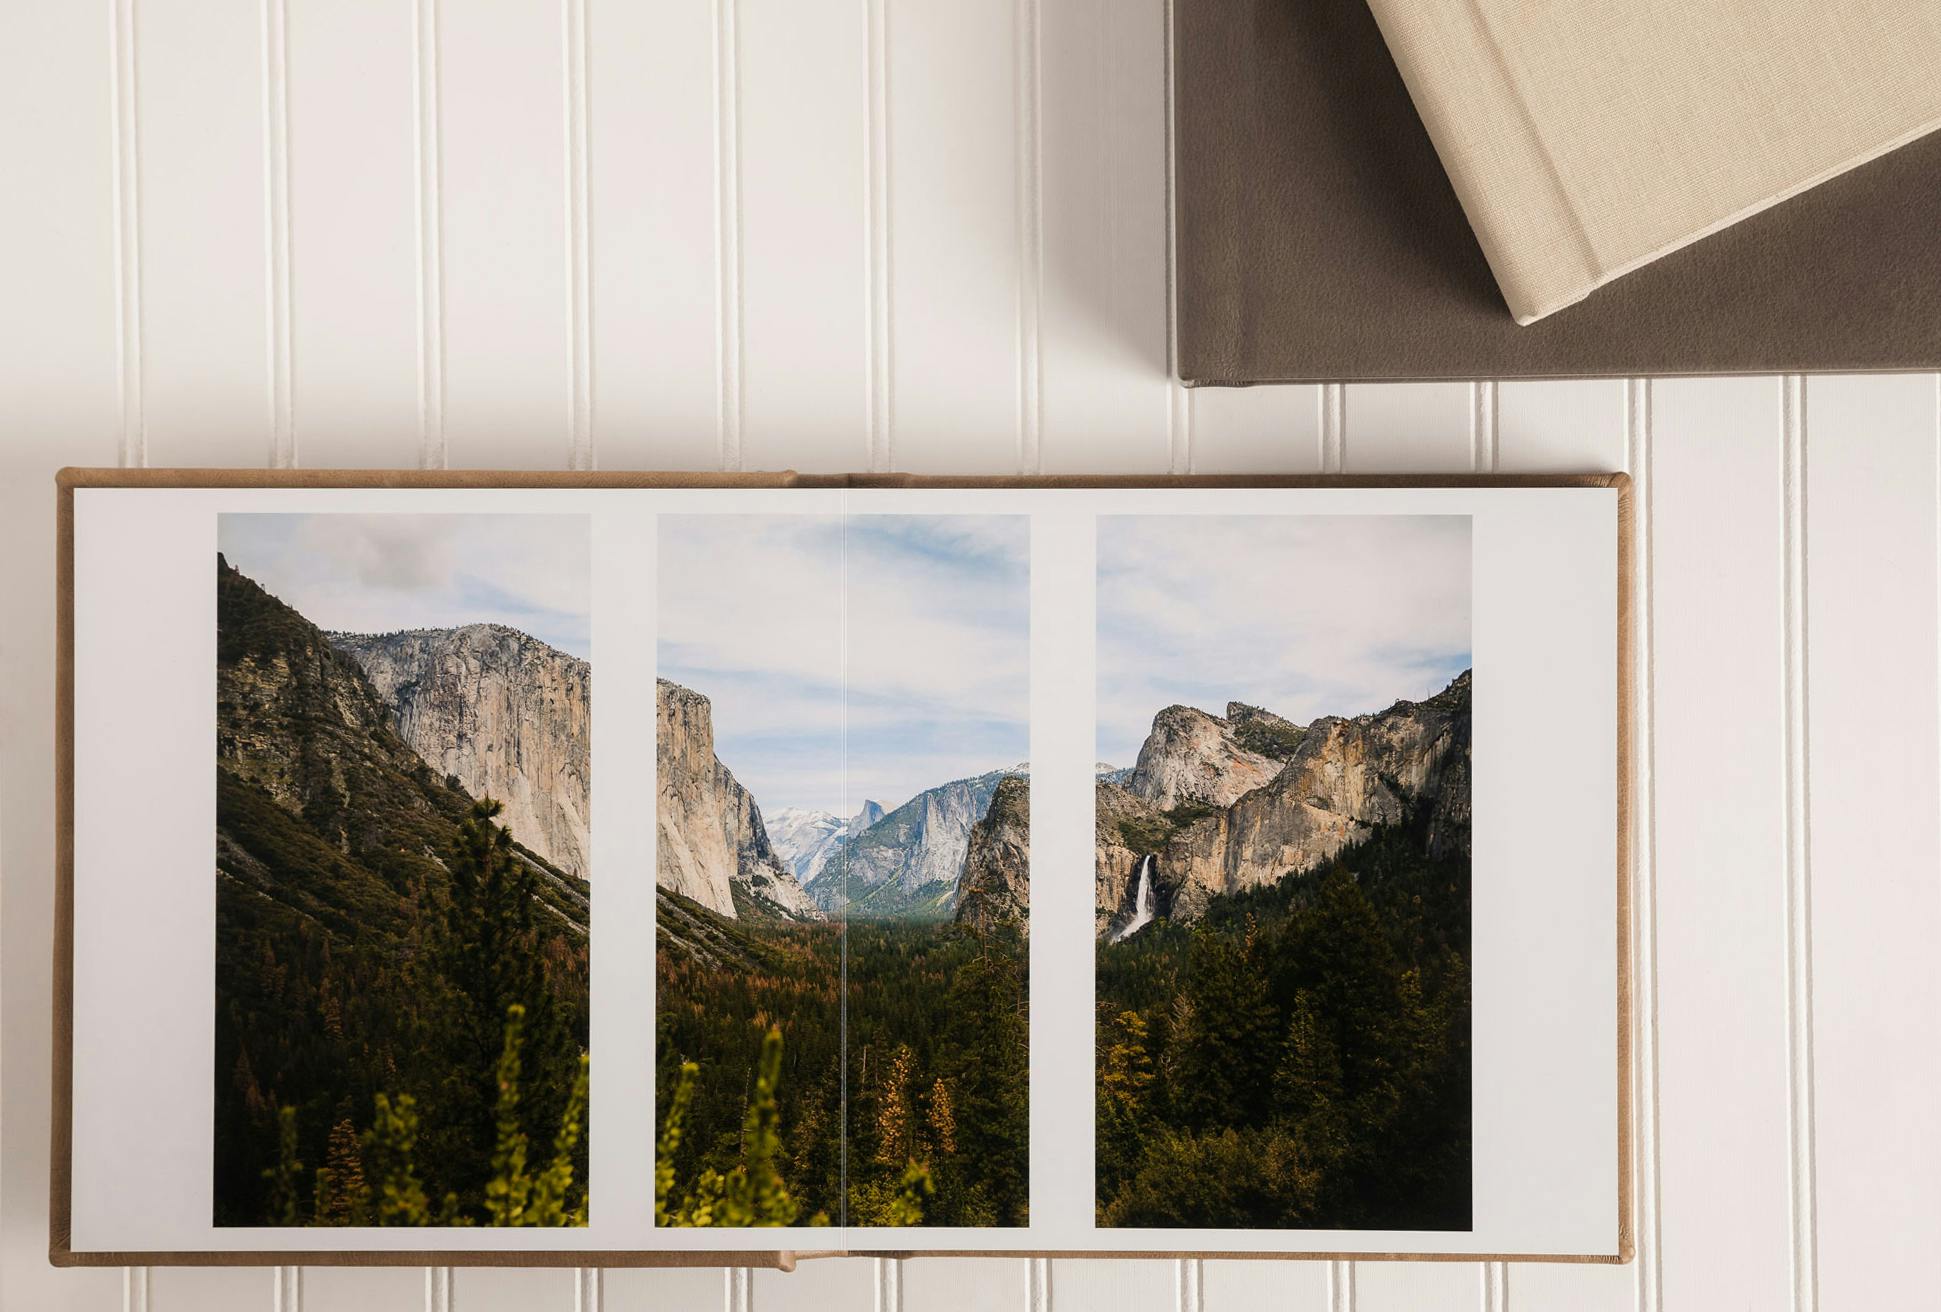 Increase print sales for your photography business through storytelling